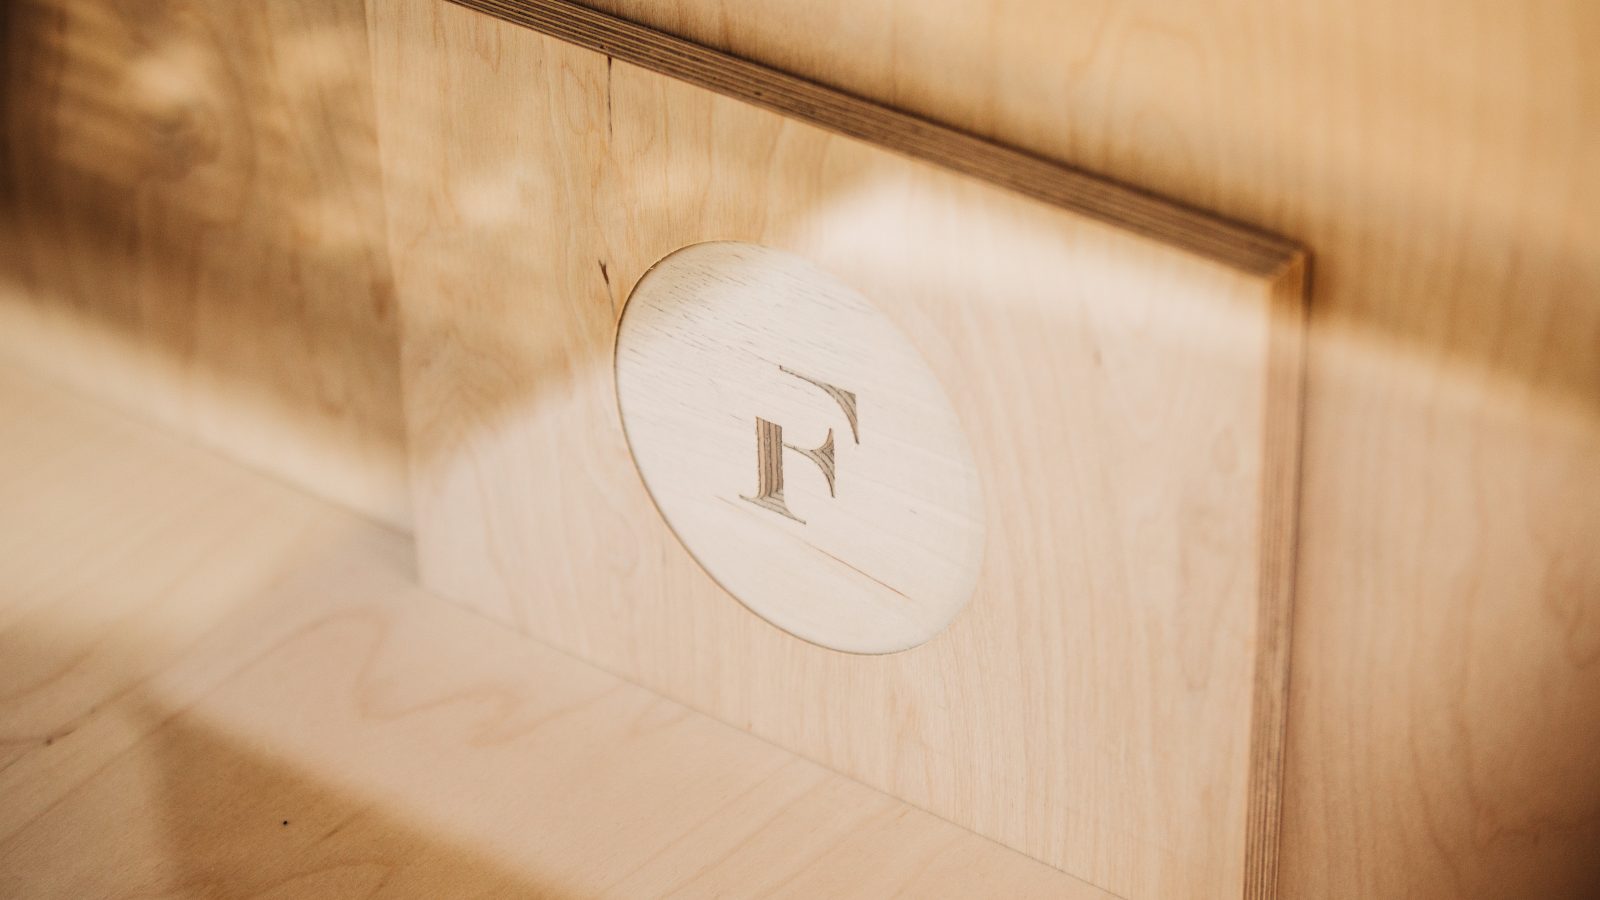 A wooden panel with an engraved circular detail featuring the letter “f” in a serif typeface, casting a soft shadow on the surrounding wood surface, ideal for brand strategy visuals.